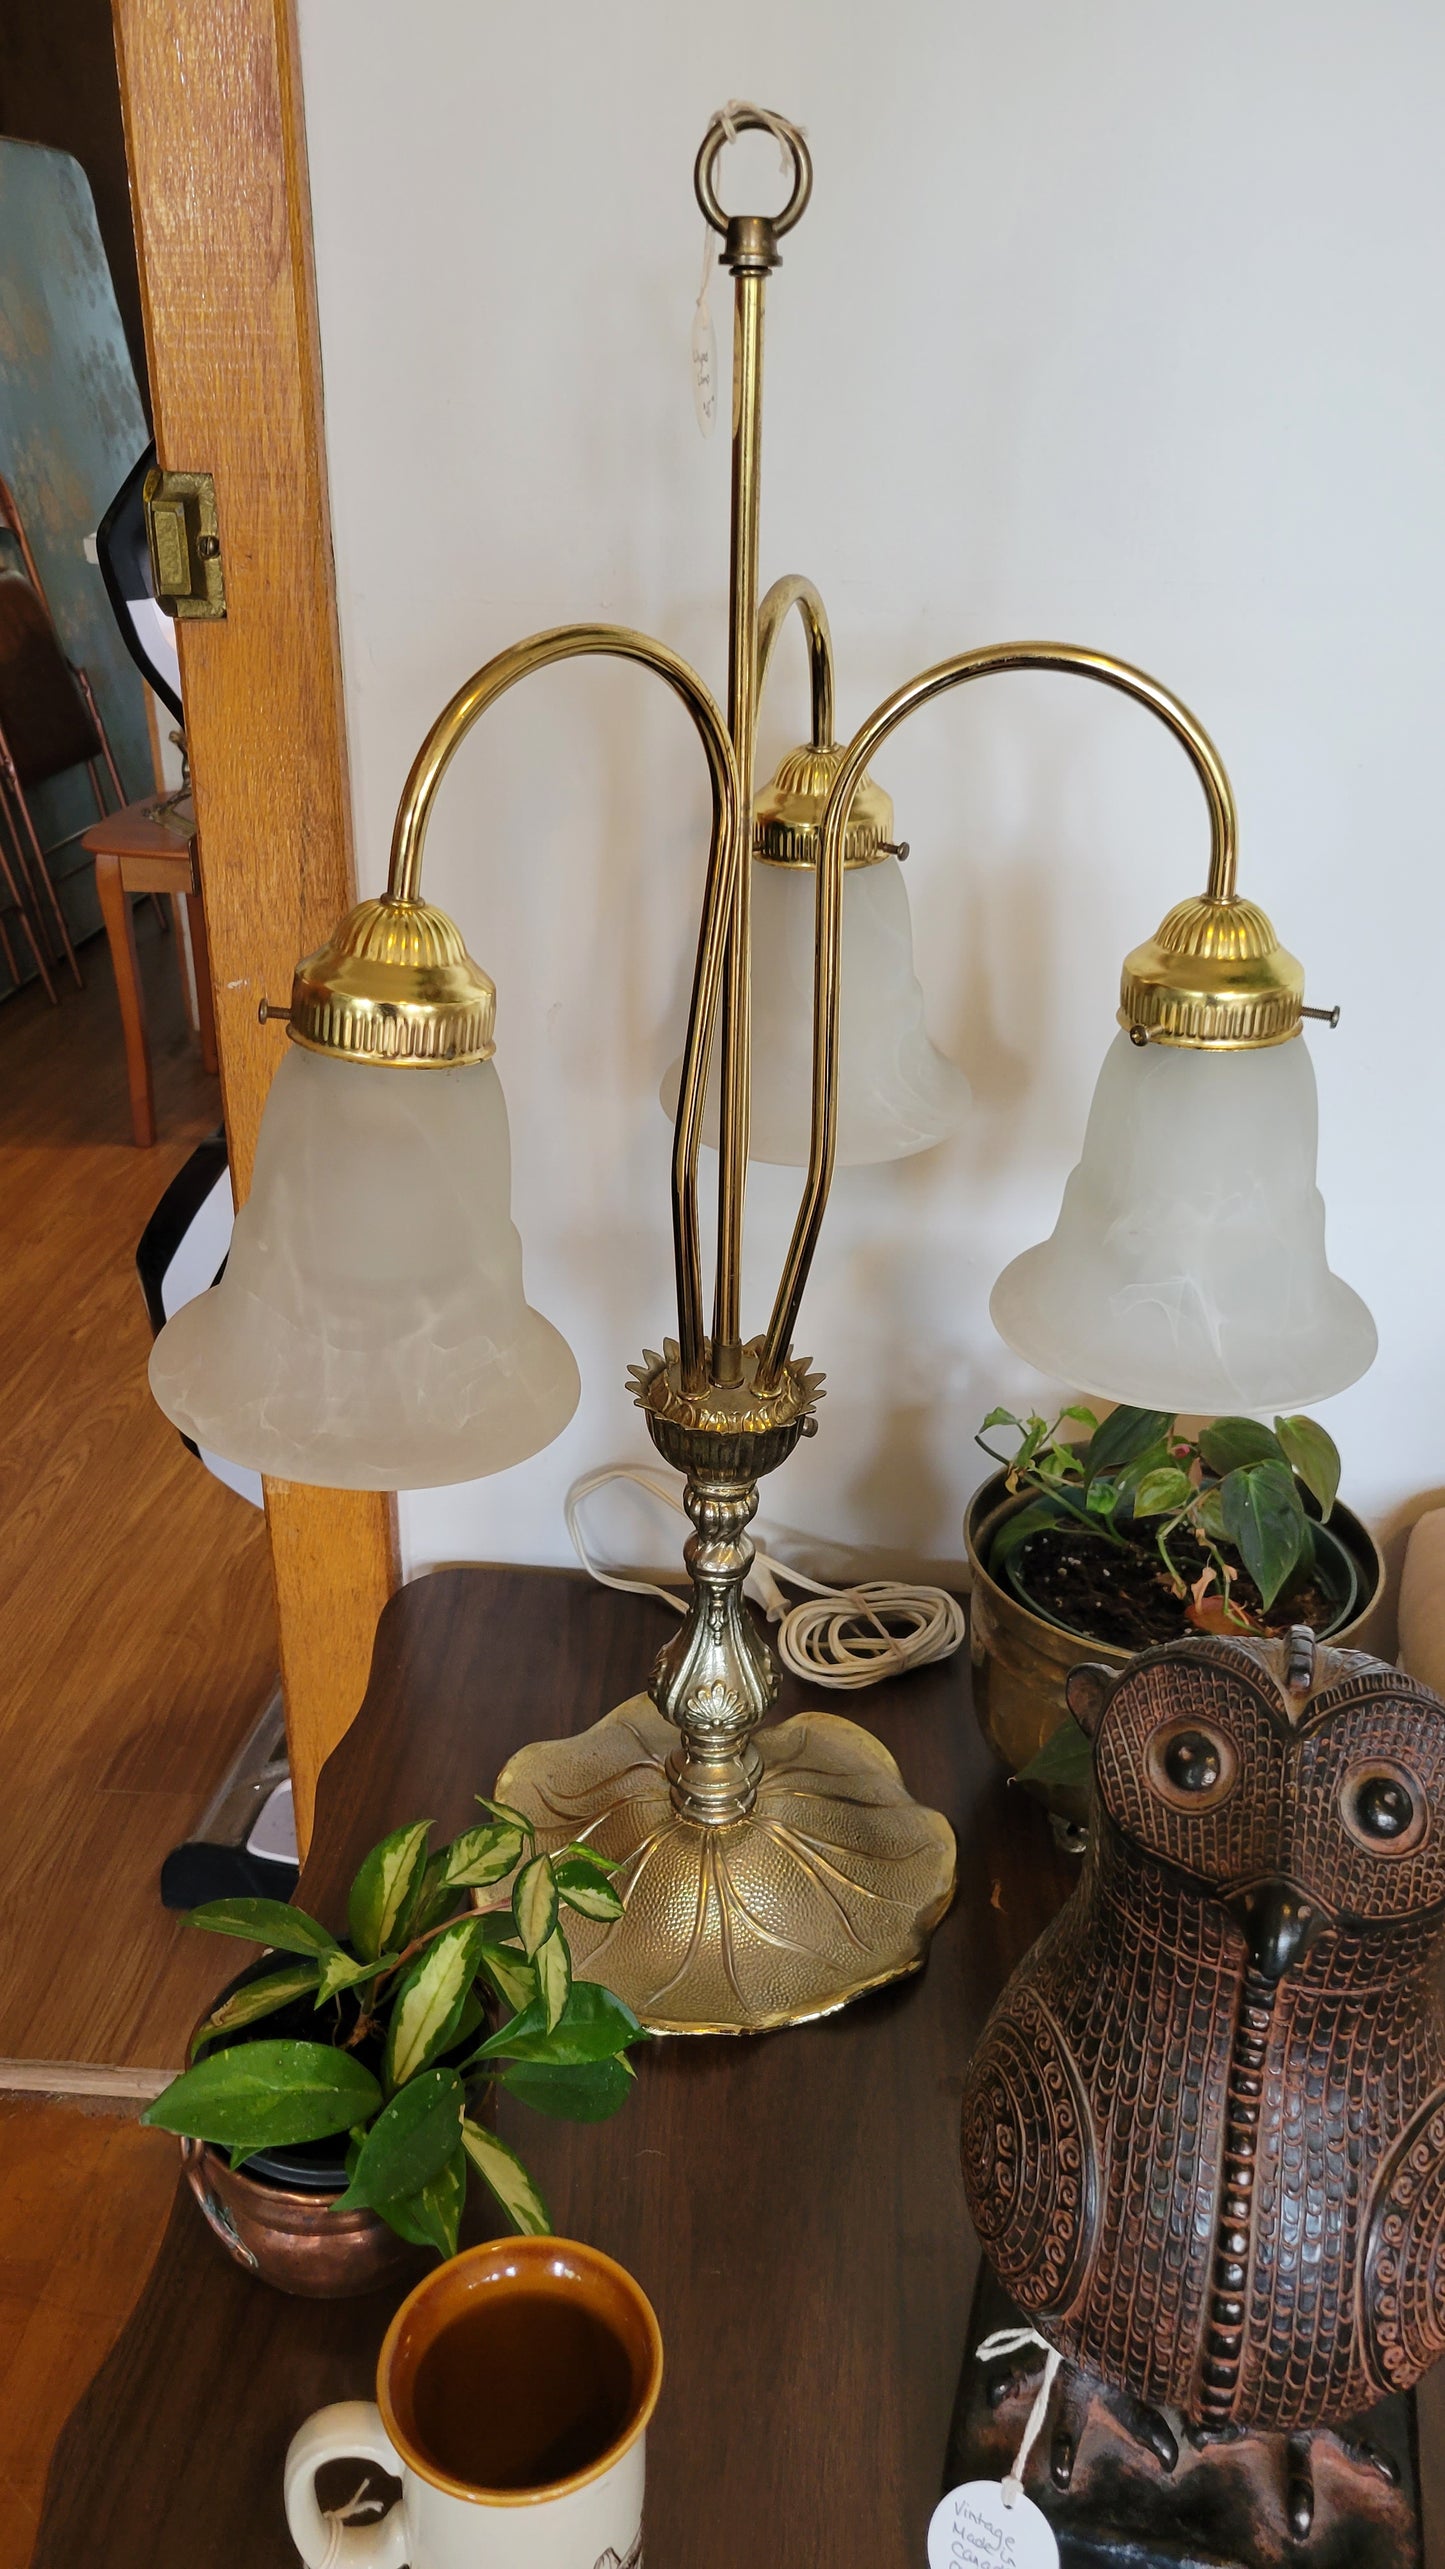 Lily pad 3 globe lamp (2 available)